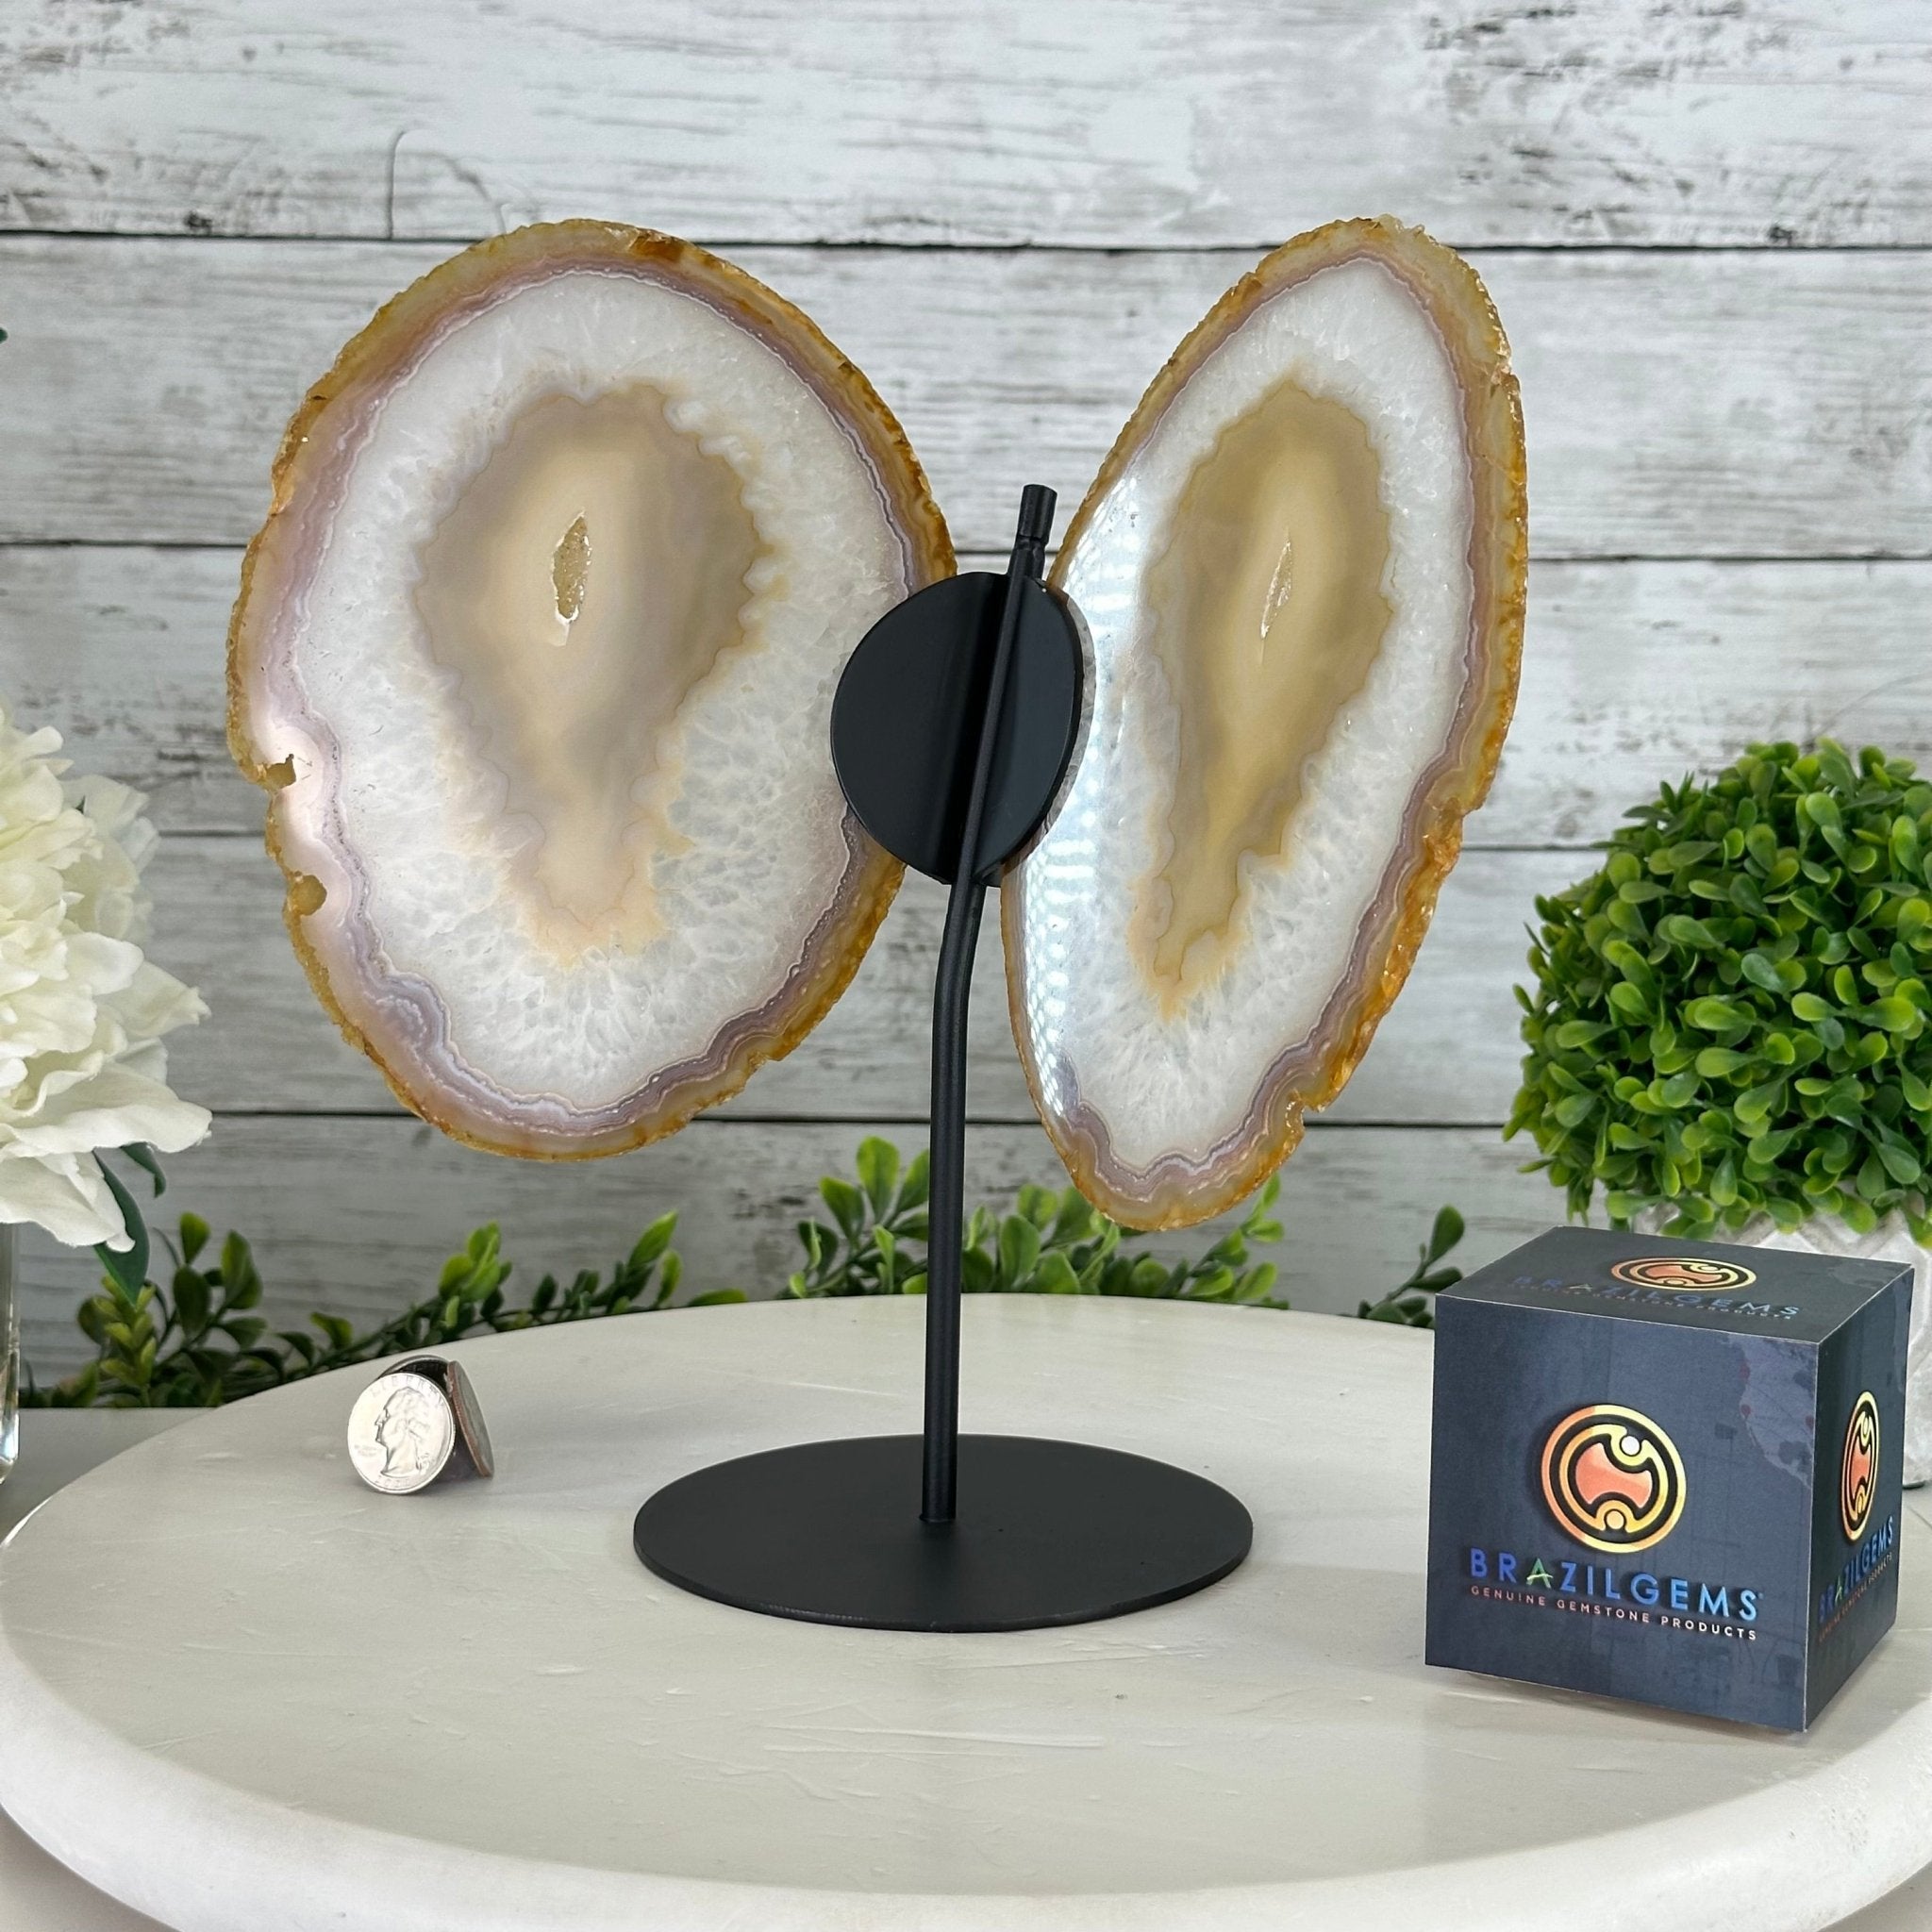 Natural Brazilian Agate "Butterfly Wings", 10.1" Tall #5050NA-121 - Brazil GemsBrazil GemsNatural Brazilian Agate "Butterfly Wings", 10.1" Tall #5050NA-121Agate Butterfly Wings5050NA-121